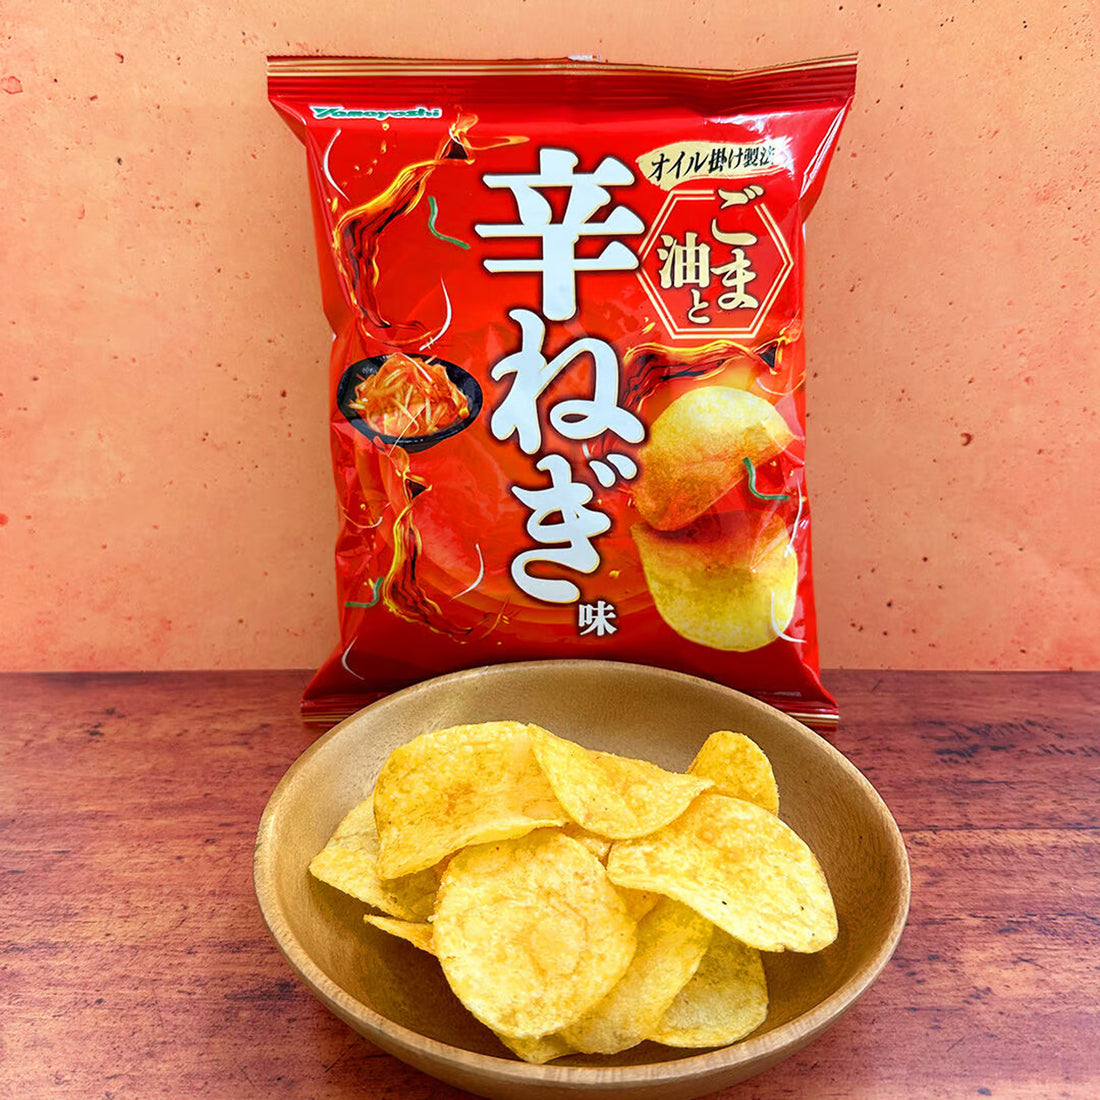 Yamayoshi Potato Chips - Sesame Oil And Spicy Green Onion Flavor 53g